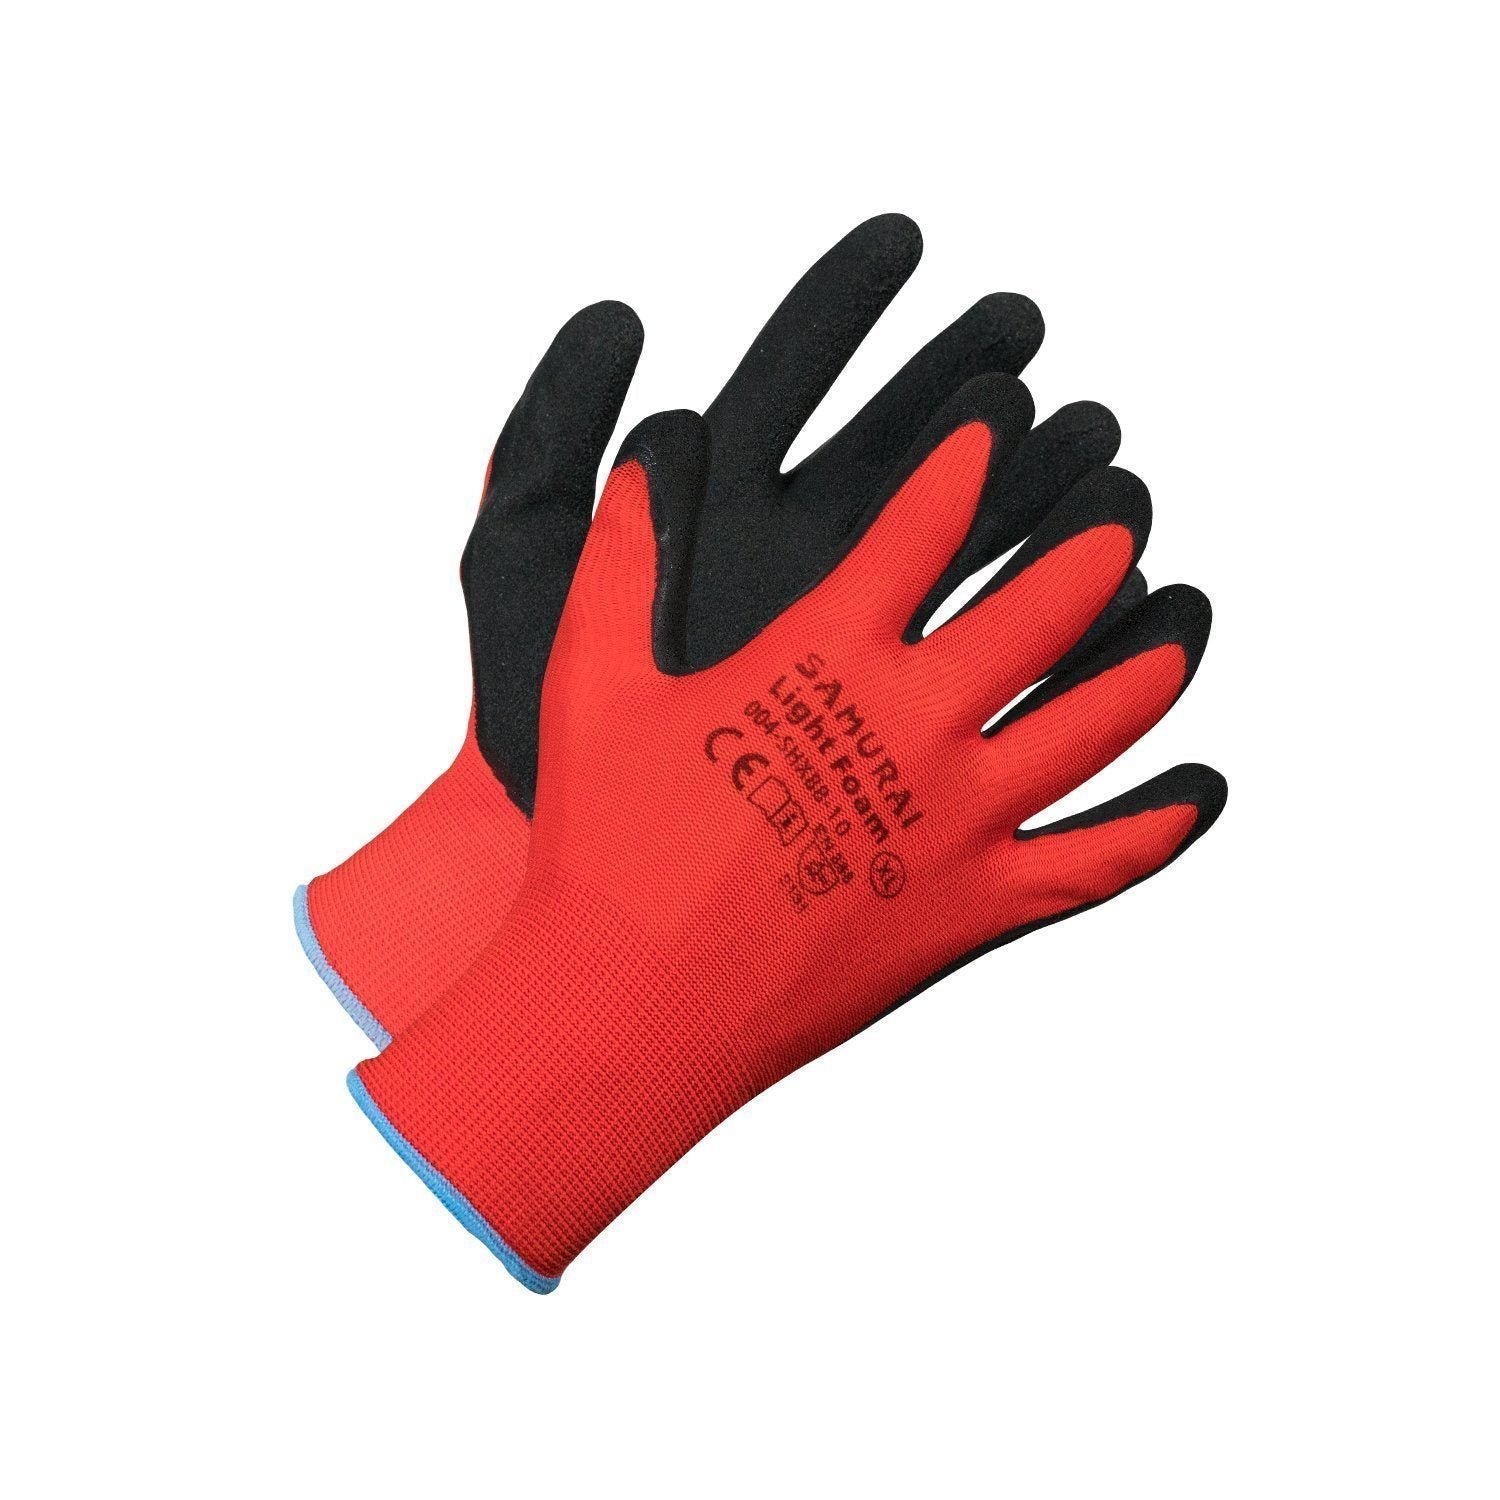 Sticky Glove Silicone Tread Grip Mechanic's Glove with TPR Knuckle Bumper, M